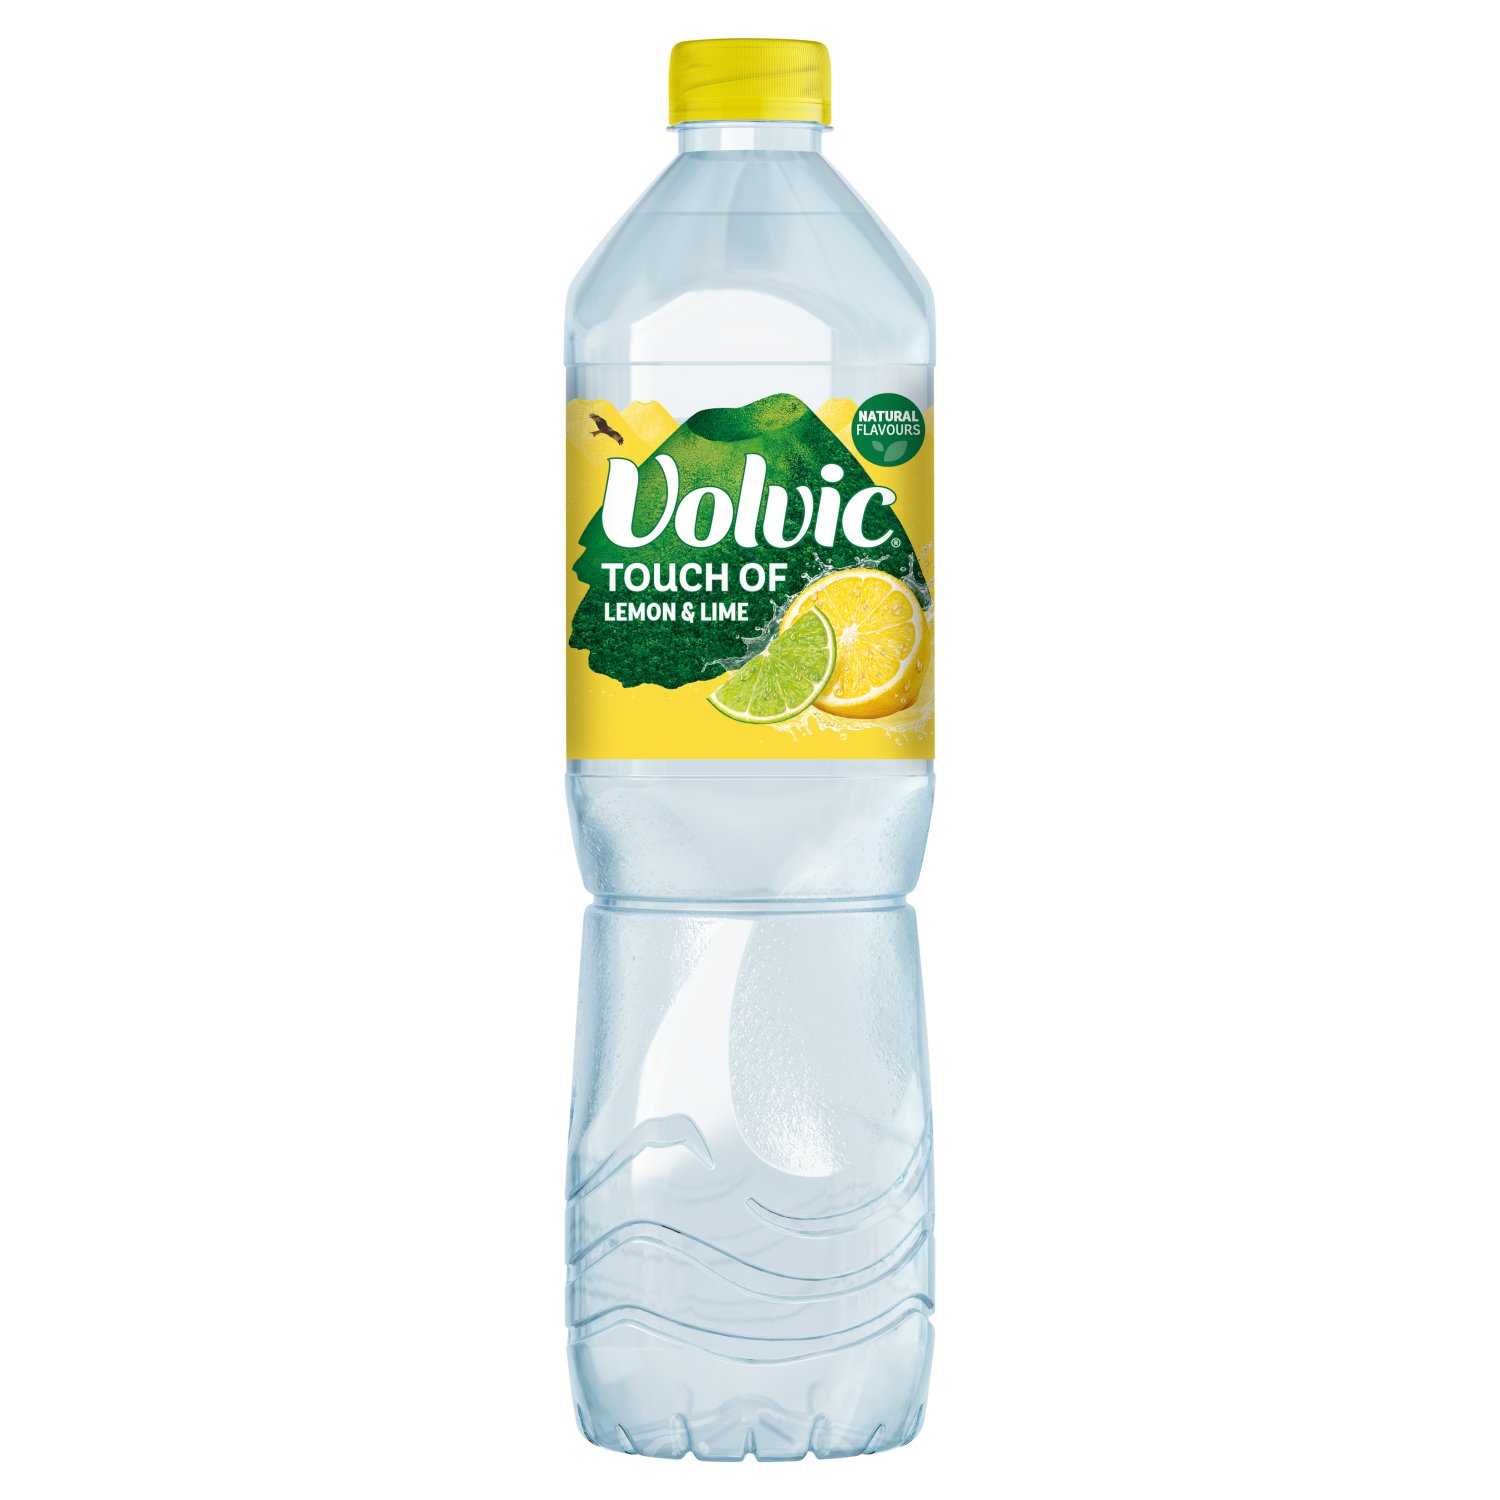 Unleash the flavour with Volvic Touch of Fruit Lemon & Lime 

For the perfect blend of refreshing Volvic Natural Mineral Water and a twist of natural fruit flavour, try Volvic Touch of Fruit Lemon & Lime flavoured water. Low in sugar, with no artificial sweeteners*, Volvic Touch of Fruit Lemon & Lime flavoured water is just 25 calories per 250ml serving. 
 
Filtered through six layers of volcanic rock, our mineral water stems from one of the largest nature reserves in Europe. We’ve simply added a touch of fruit for a delicious taste that you’ll love.  
 
Our 1.5l bottles of Volvic Touch of Fruit Lemon & Lime are perfect for sharing with friends and family or keeping you hydrated*** throughout the day. 
 
As well as 7 other delicious flavours of Volvic Touch of Fruit, explore our natural mineral water, which comes in a variety of different formats. From small and compact, to bigger bottles and water multipacks, there’s a Volvic Natural Mineral Water to suit you, with a taste you’ll love. 

*Sweetened with a bit of sugar and stevia leaf extract 
** Find out more about our carbon reduction initiatives at: www.volvic.co.uk/sustainability/carbon-neutral 
***Water (2L/day from all sources) contributes to the maintenance of normal physical and cognitive functions